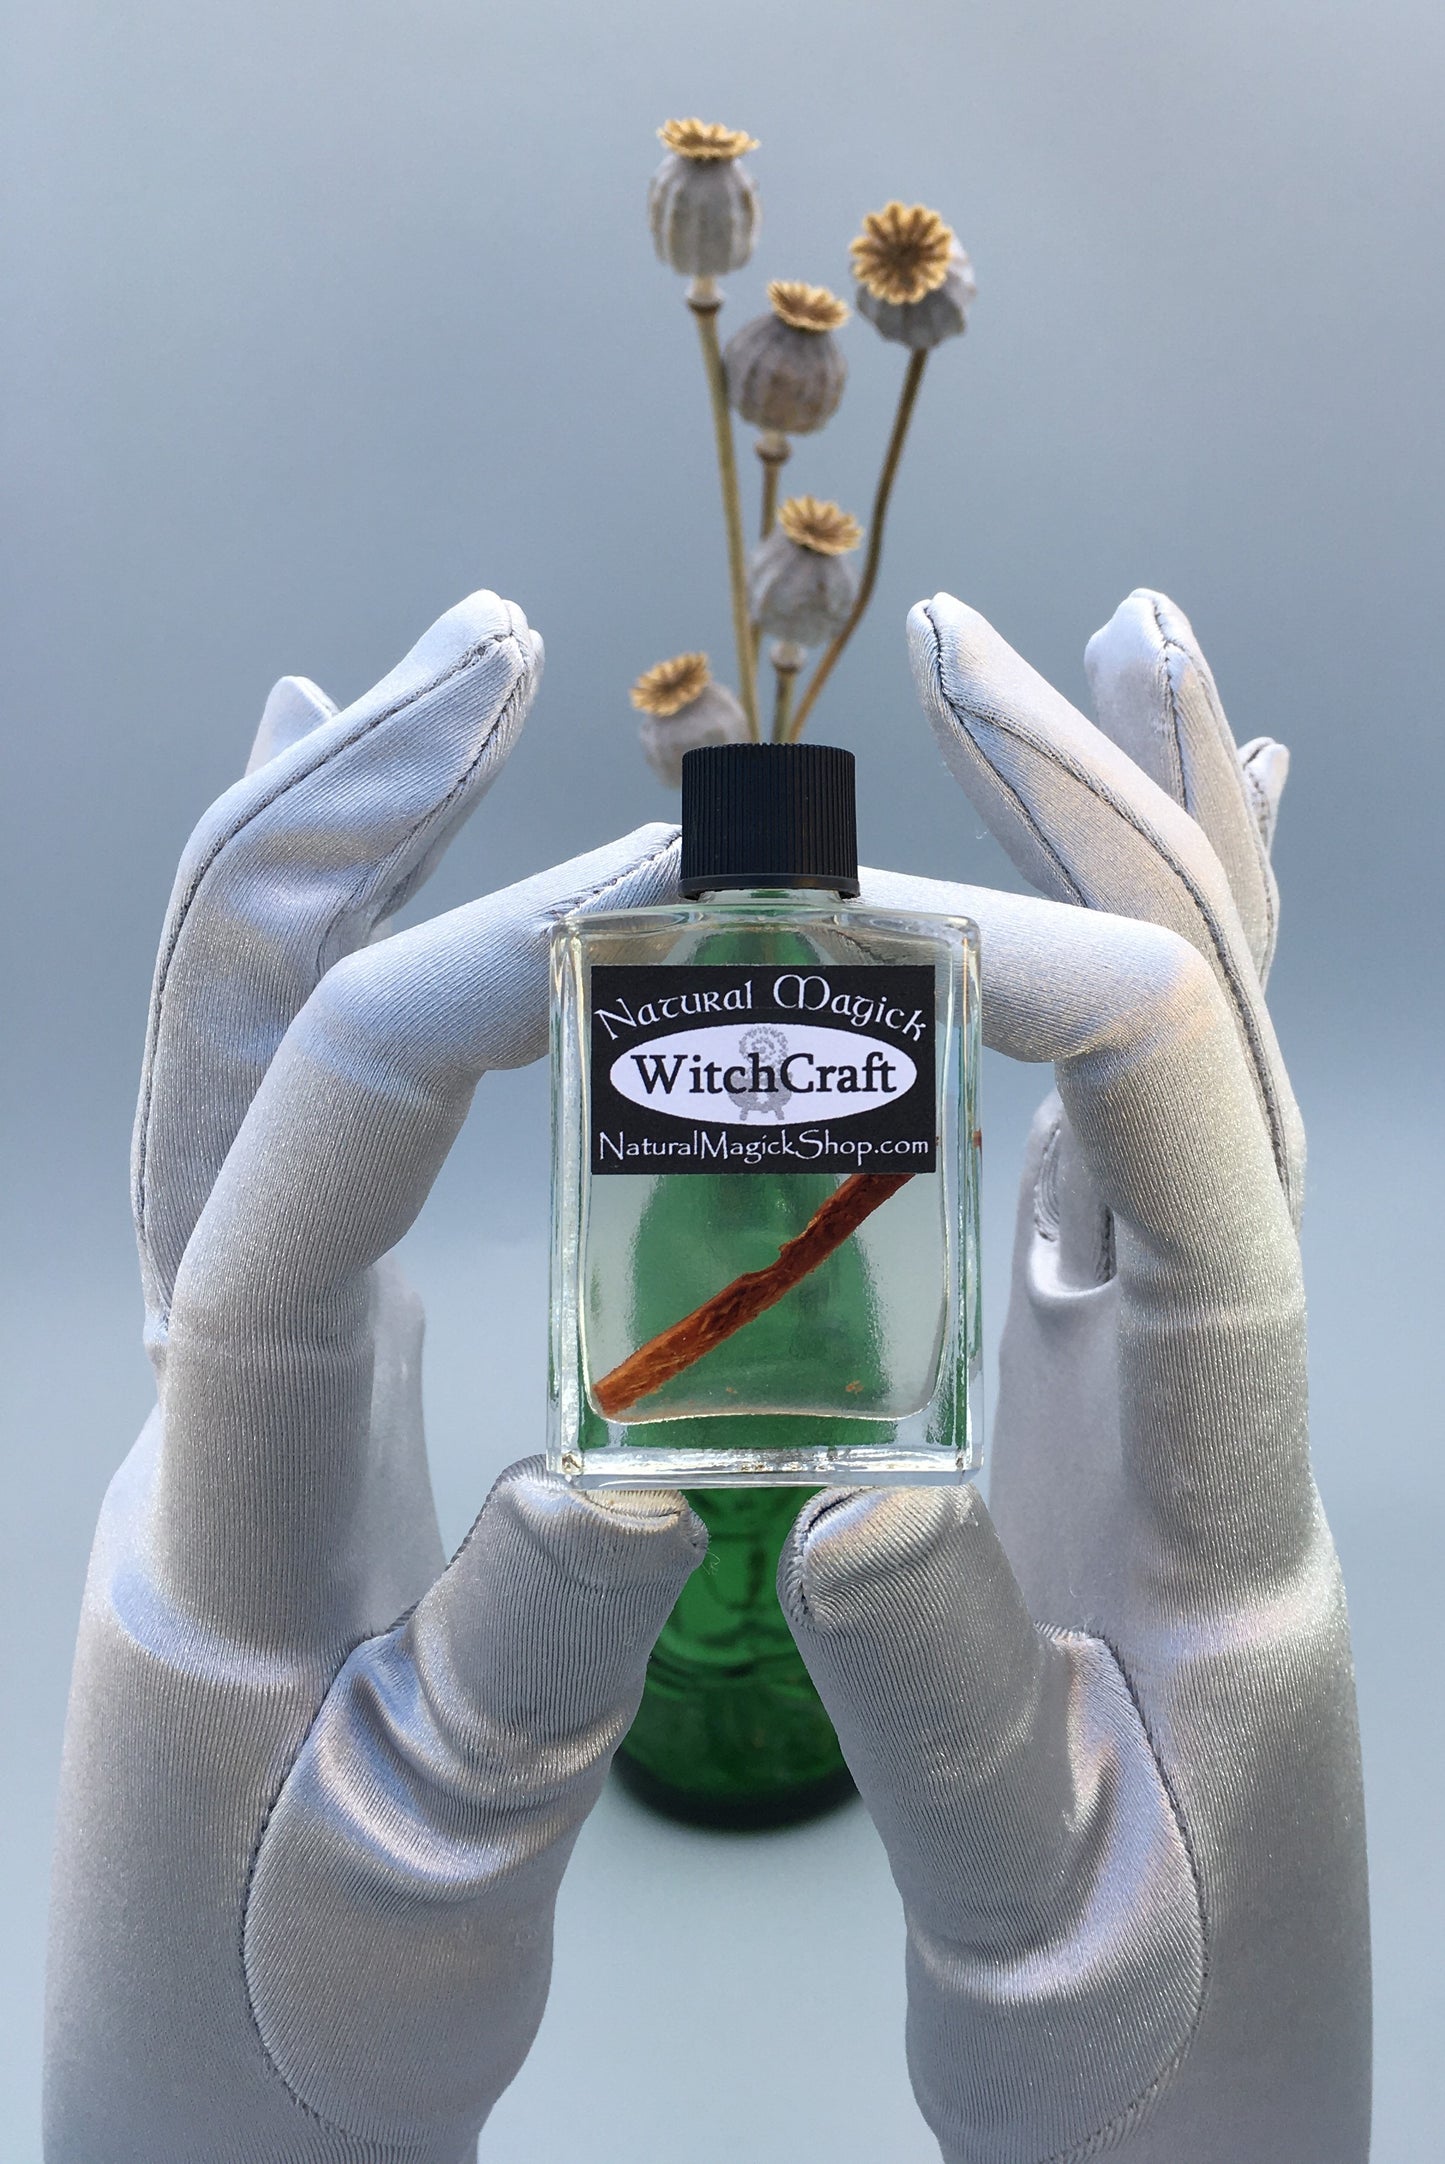 witchcraft oil - Natural Magick Shop